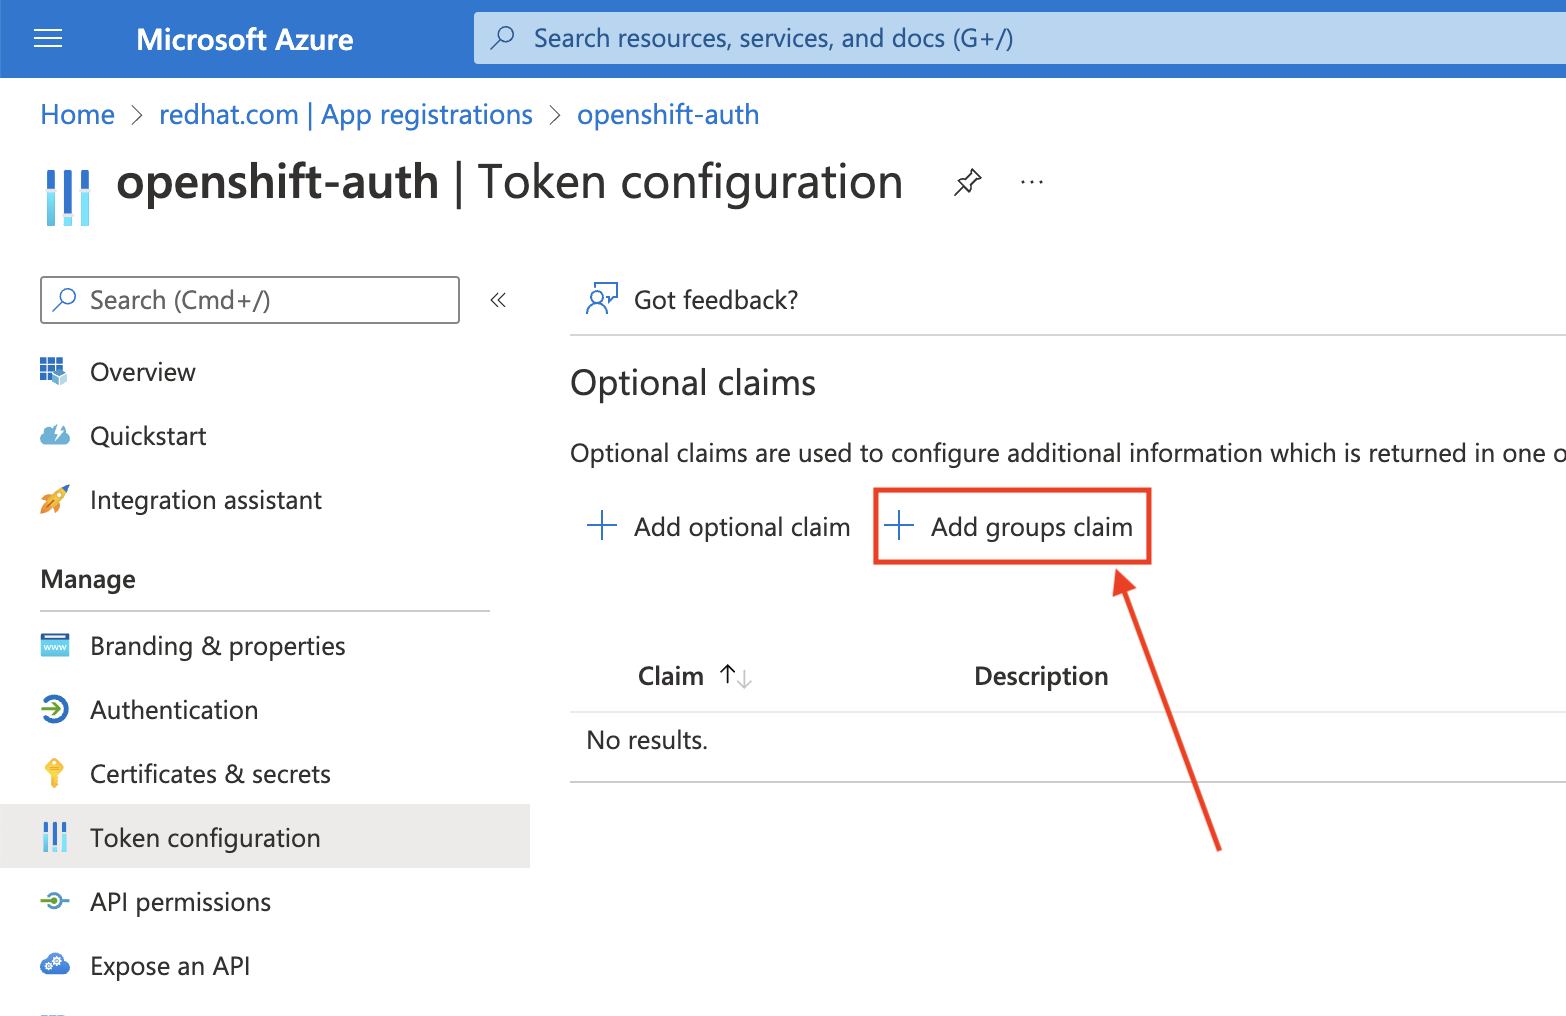 Azure Portal - Add Groups Claim Page